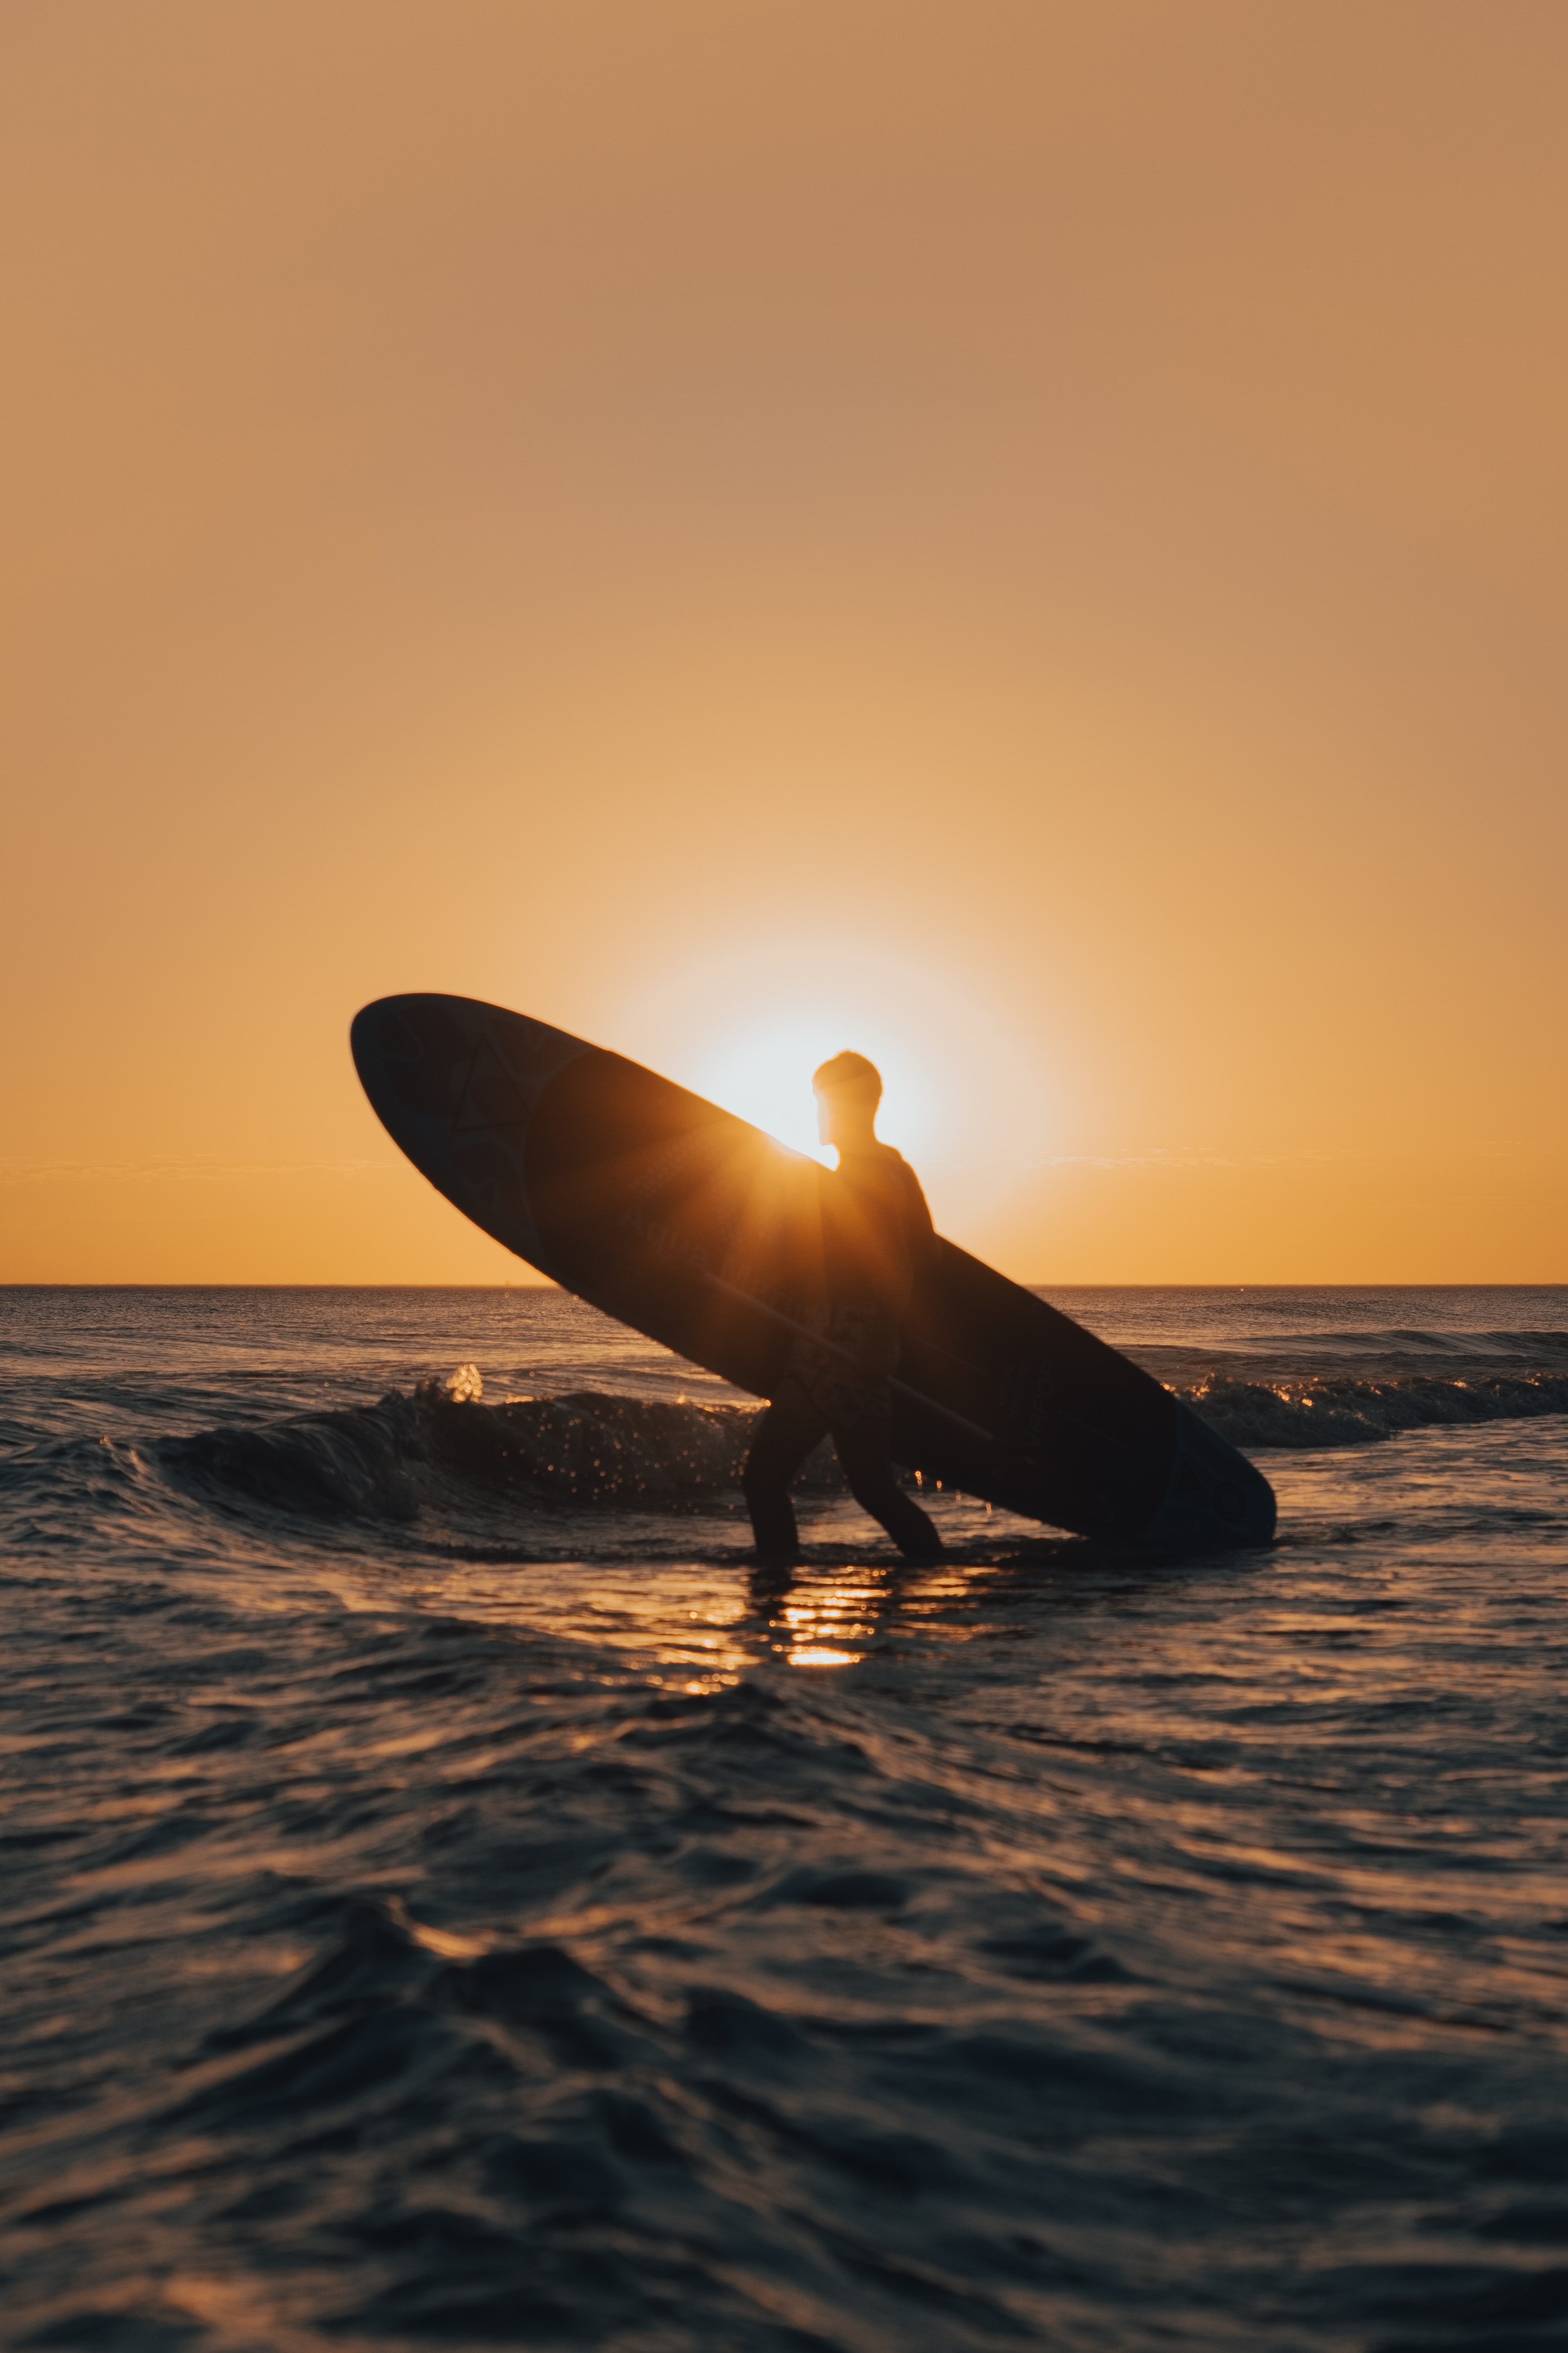 Full HD sports, sunset, waves, serfing, silhouette, surfer